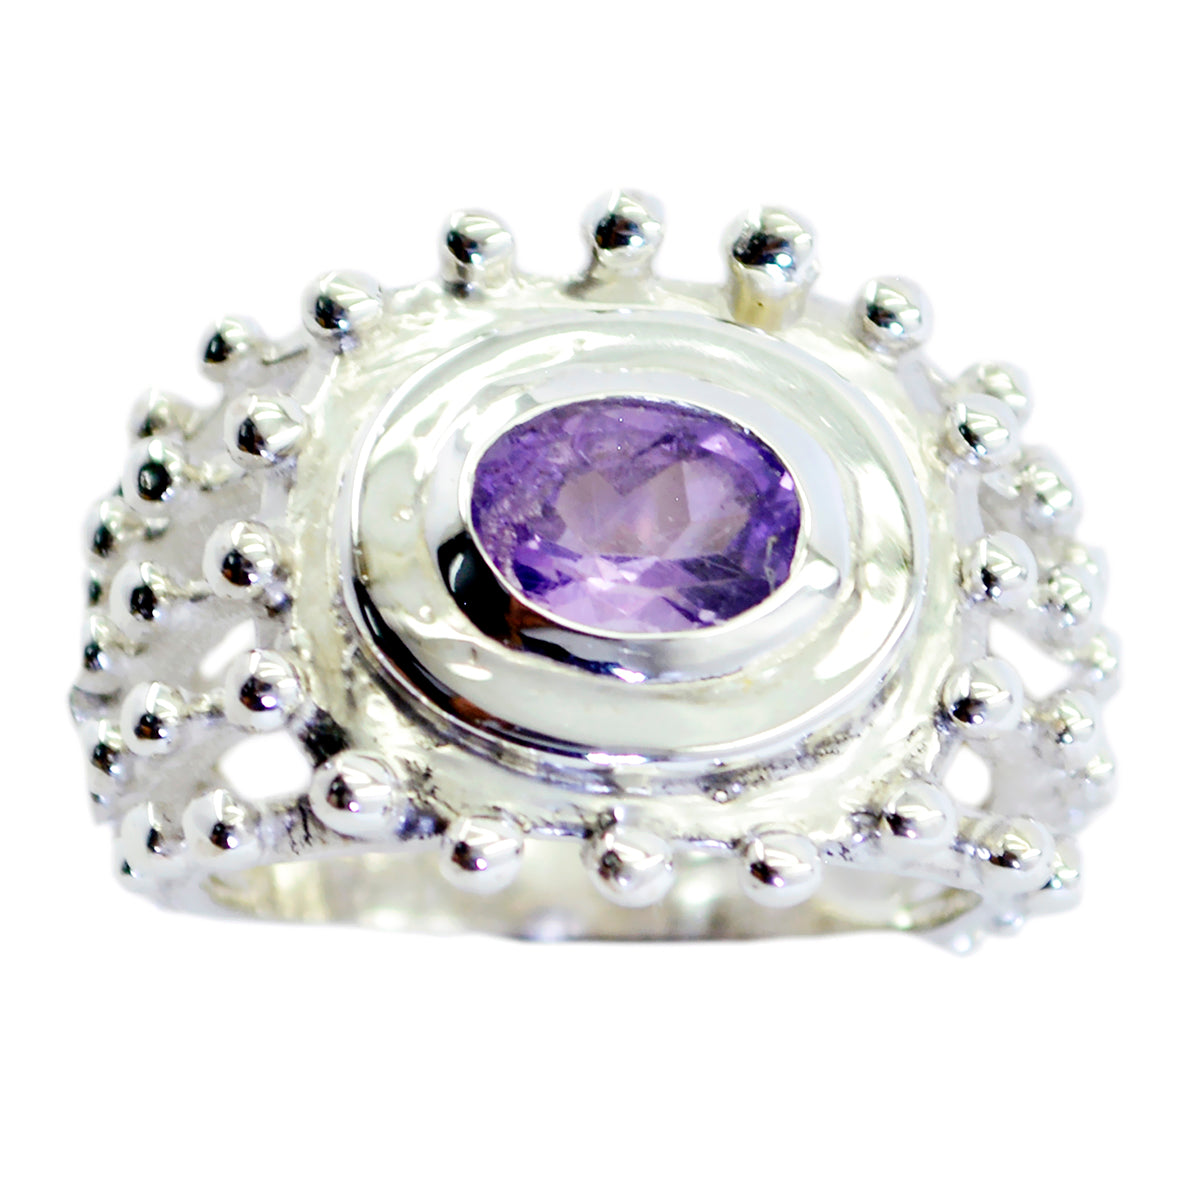 Fine-Looking Gem Amethyst Solid Silver Ring Antique Costume Jewelry